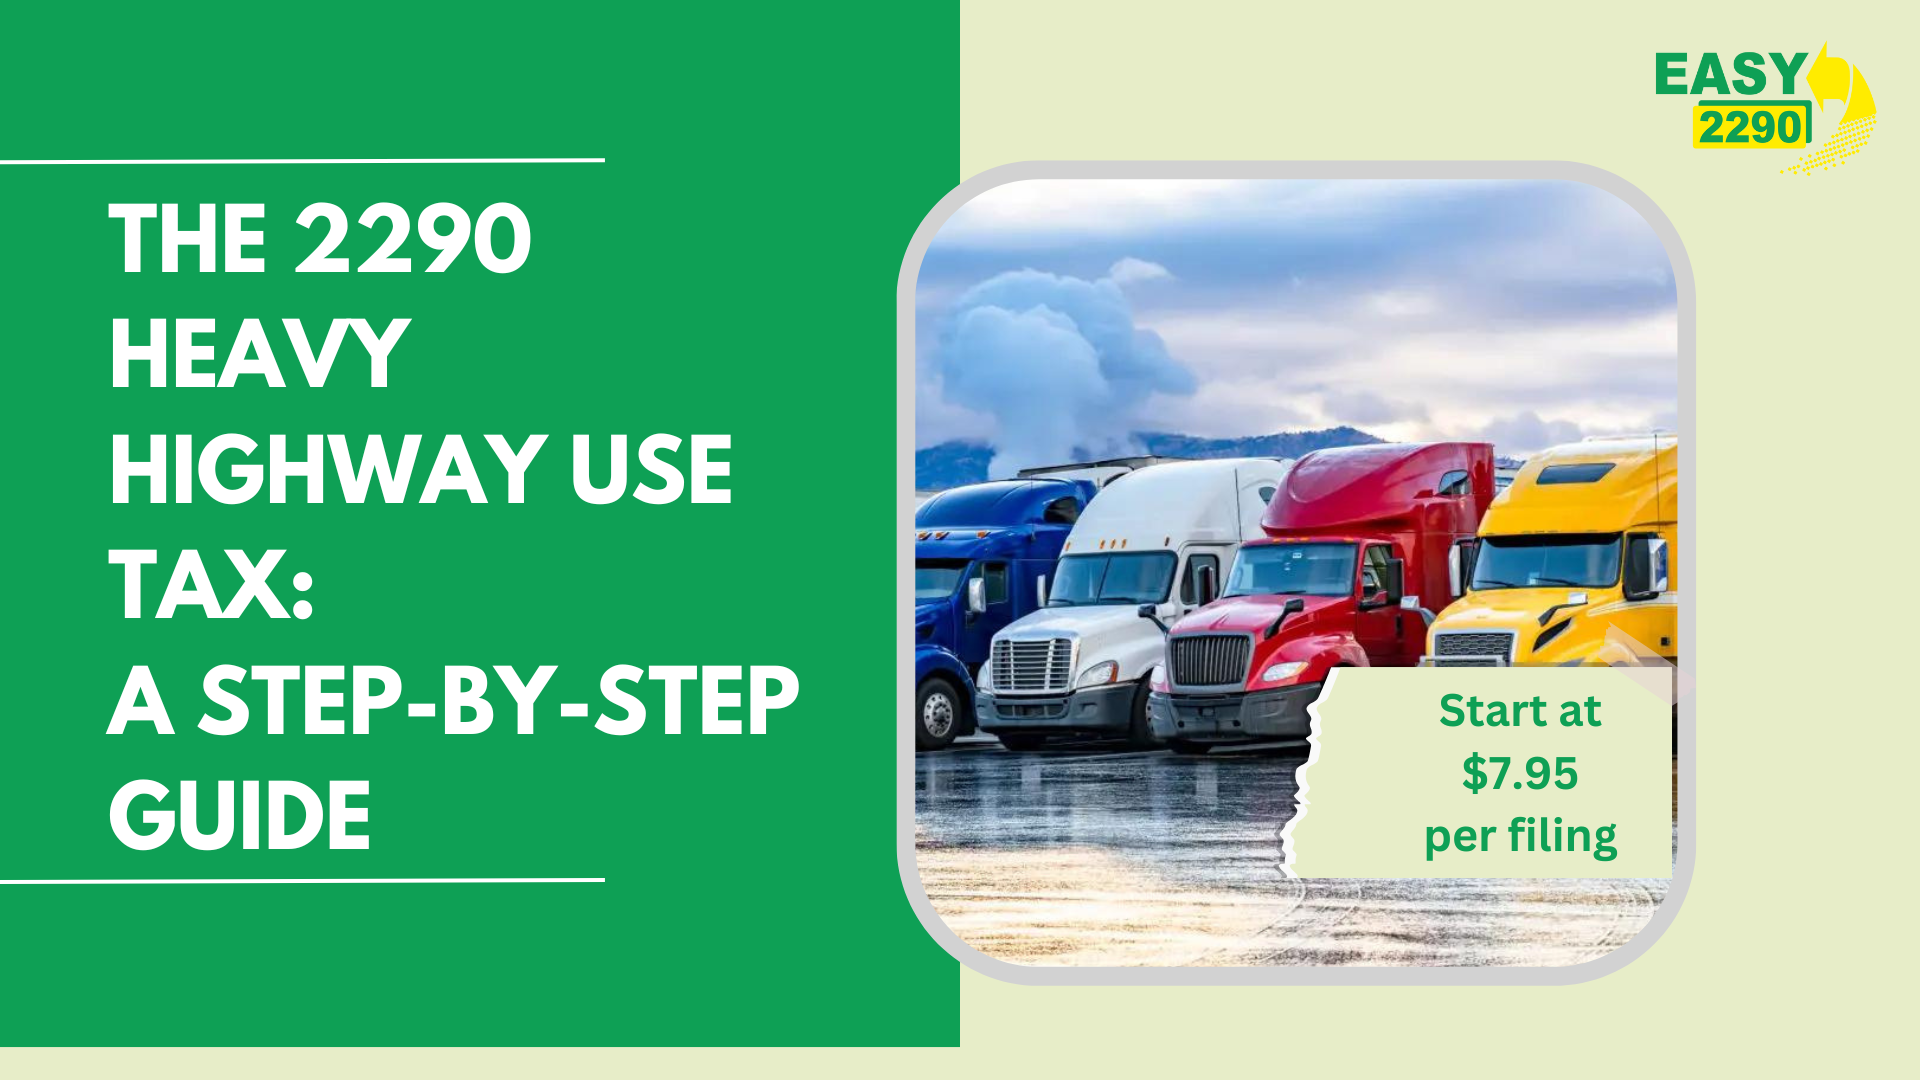 The 2290 Heavy Highway Use Tax: A Step-by-Step Guide